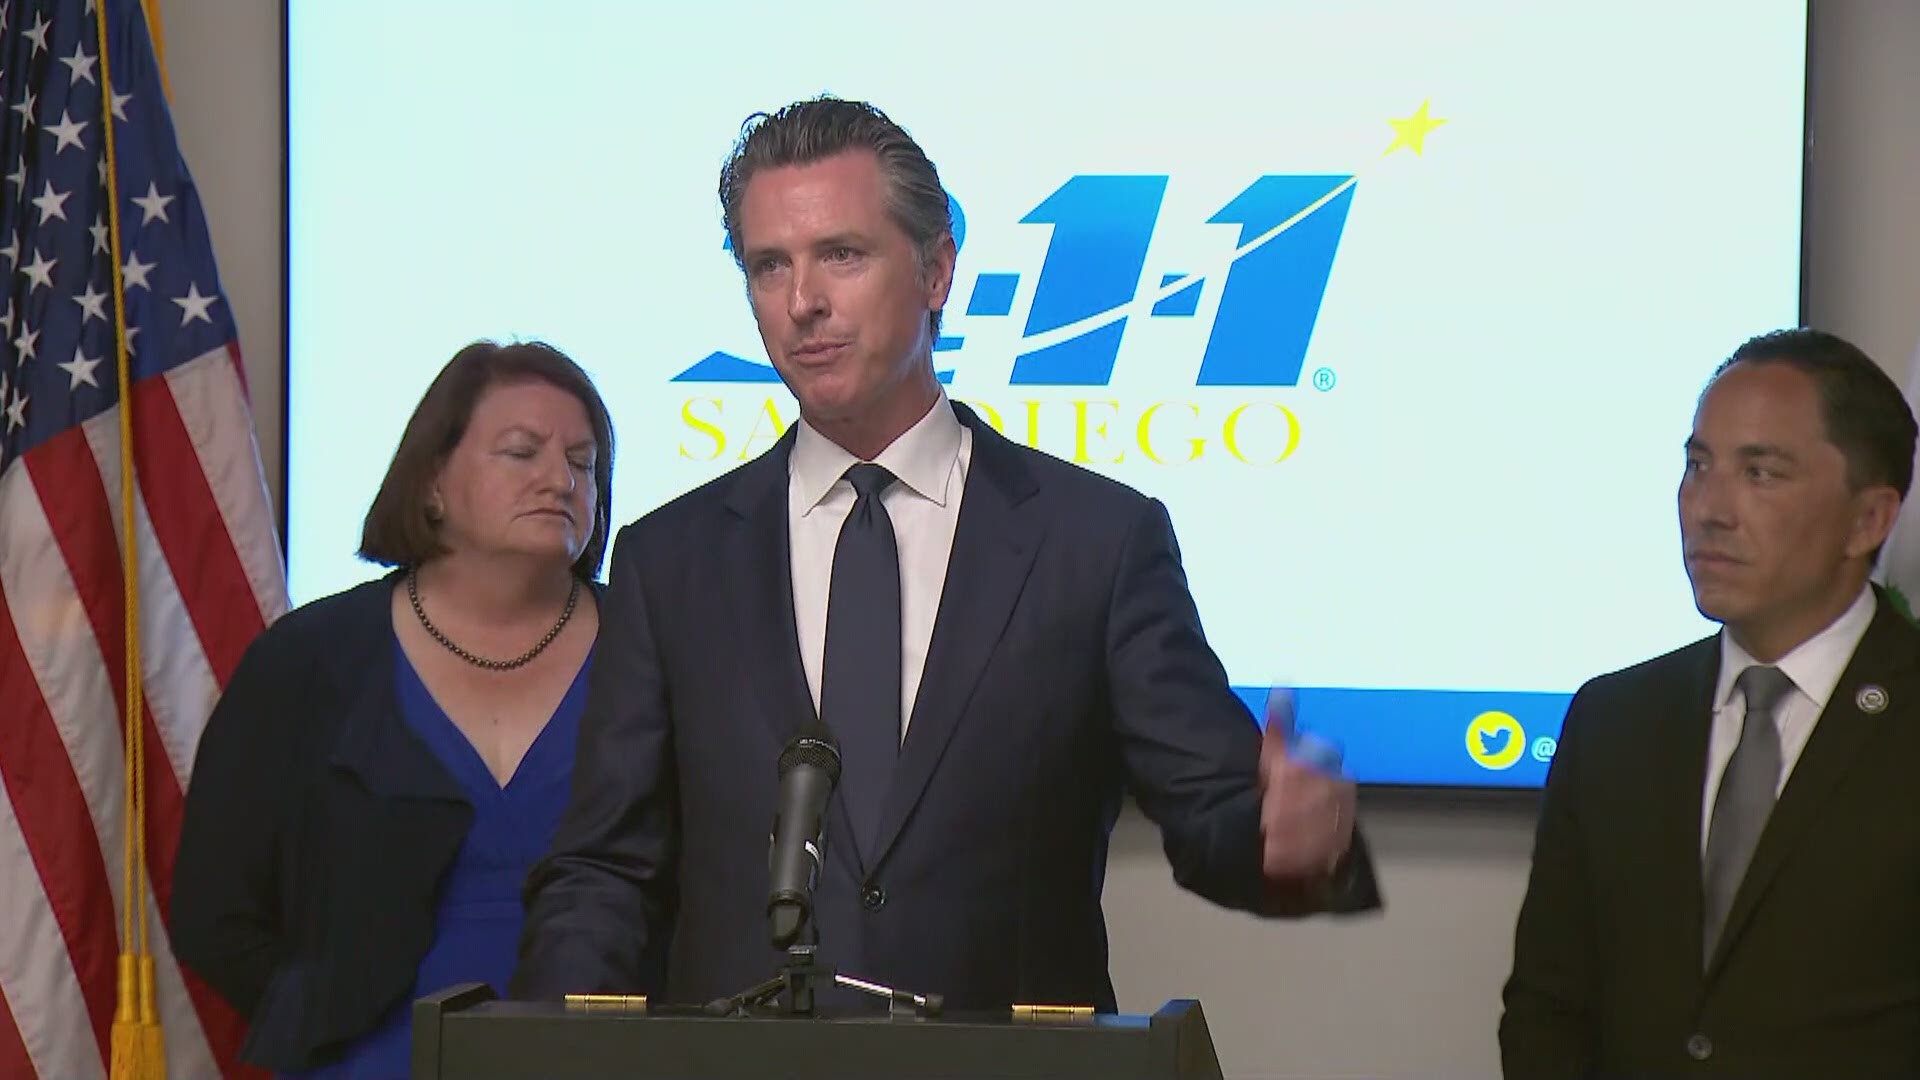 Newsom tours 2-1-1 San Diego to highlight California's efforts to make health care more affordable.